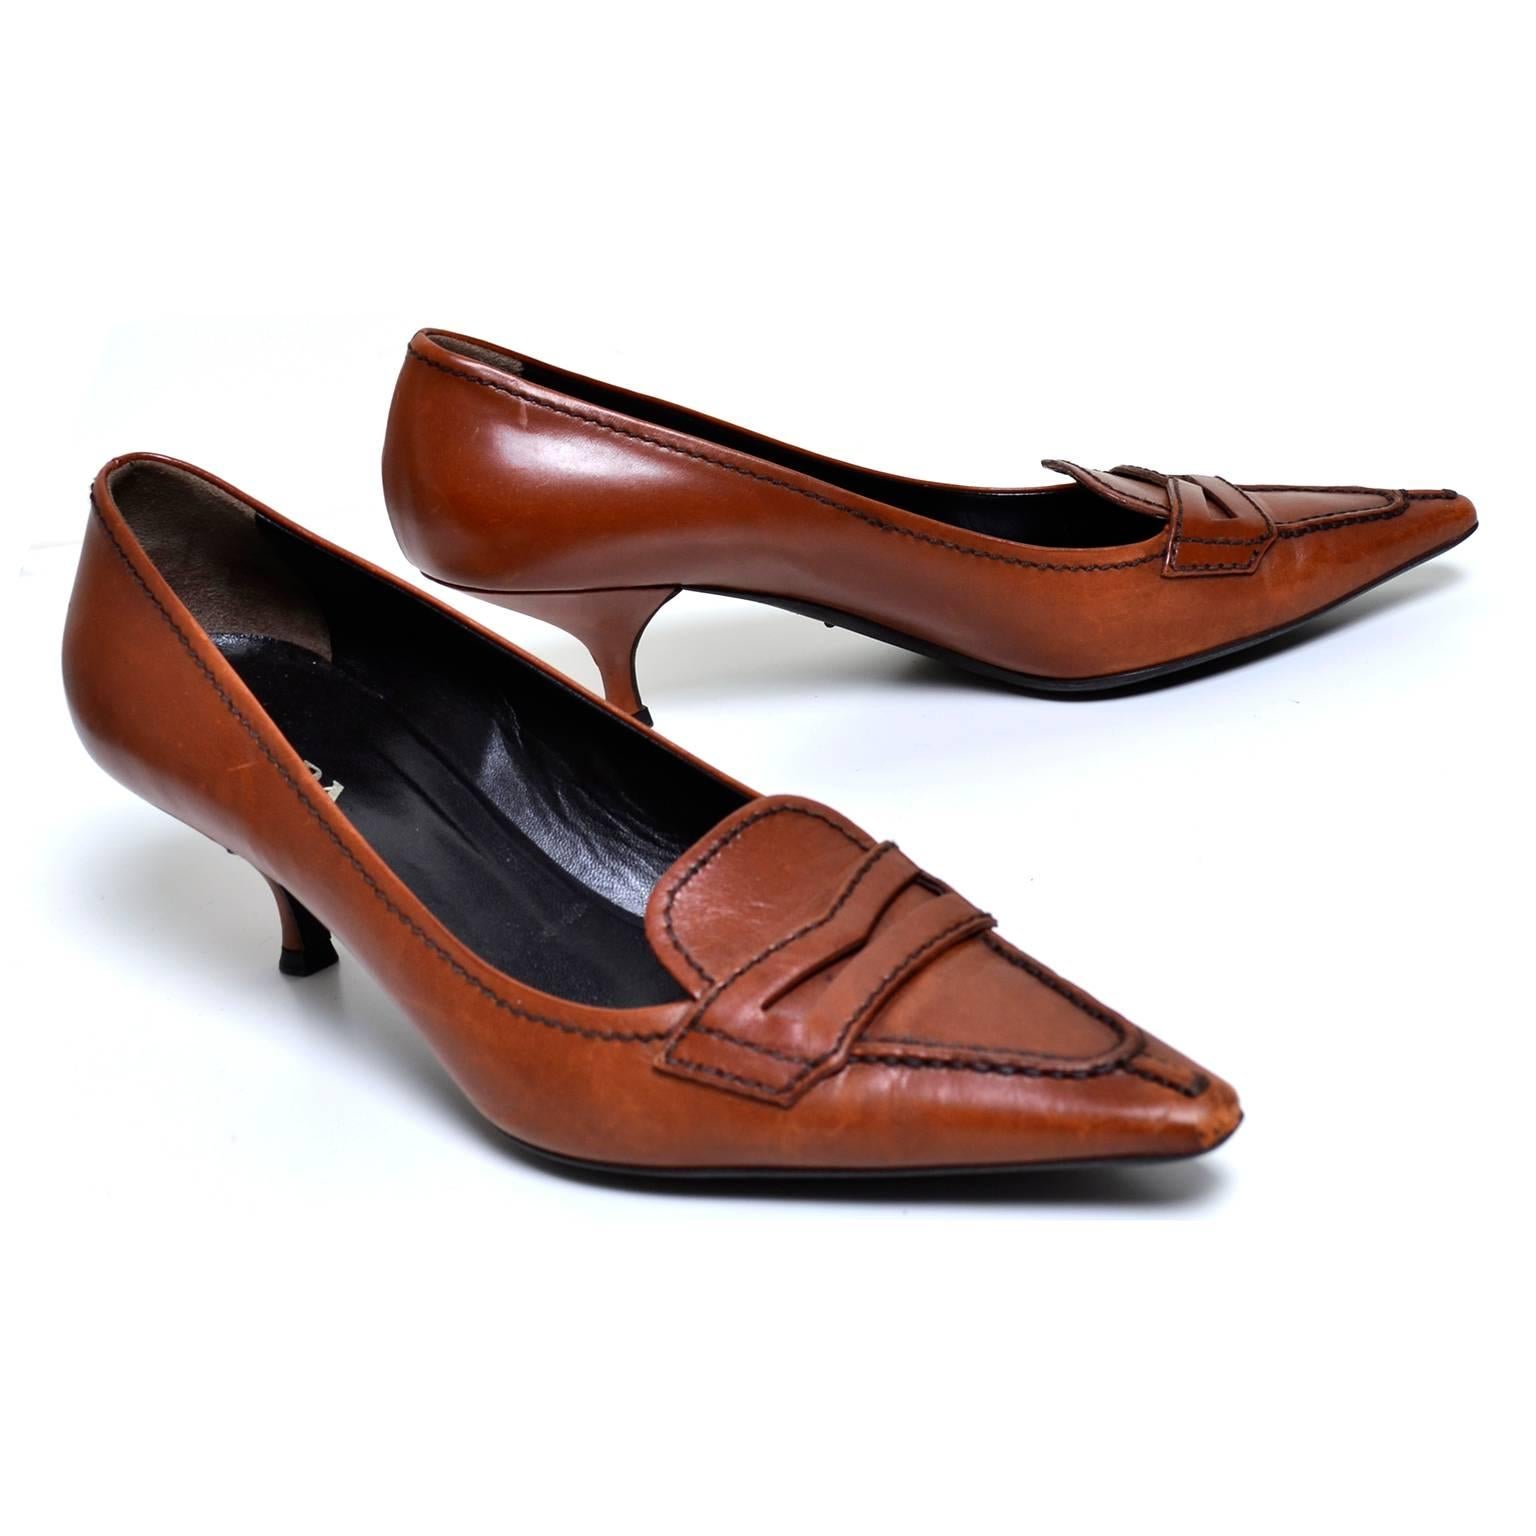 These are great vintage Prada loafers with a stylish pointed toe and perfect kitten heel. These loafers are a cognac brown, with dark brown stitching and a rubber sole. They are marked as a size 37 which is approximately a US women's size 6.5  and